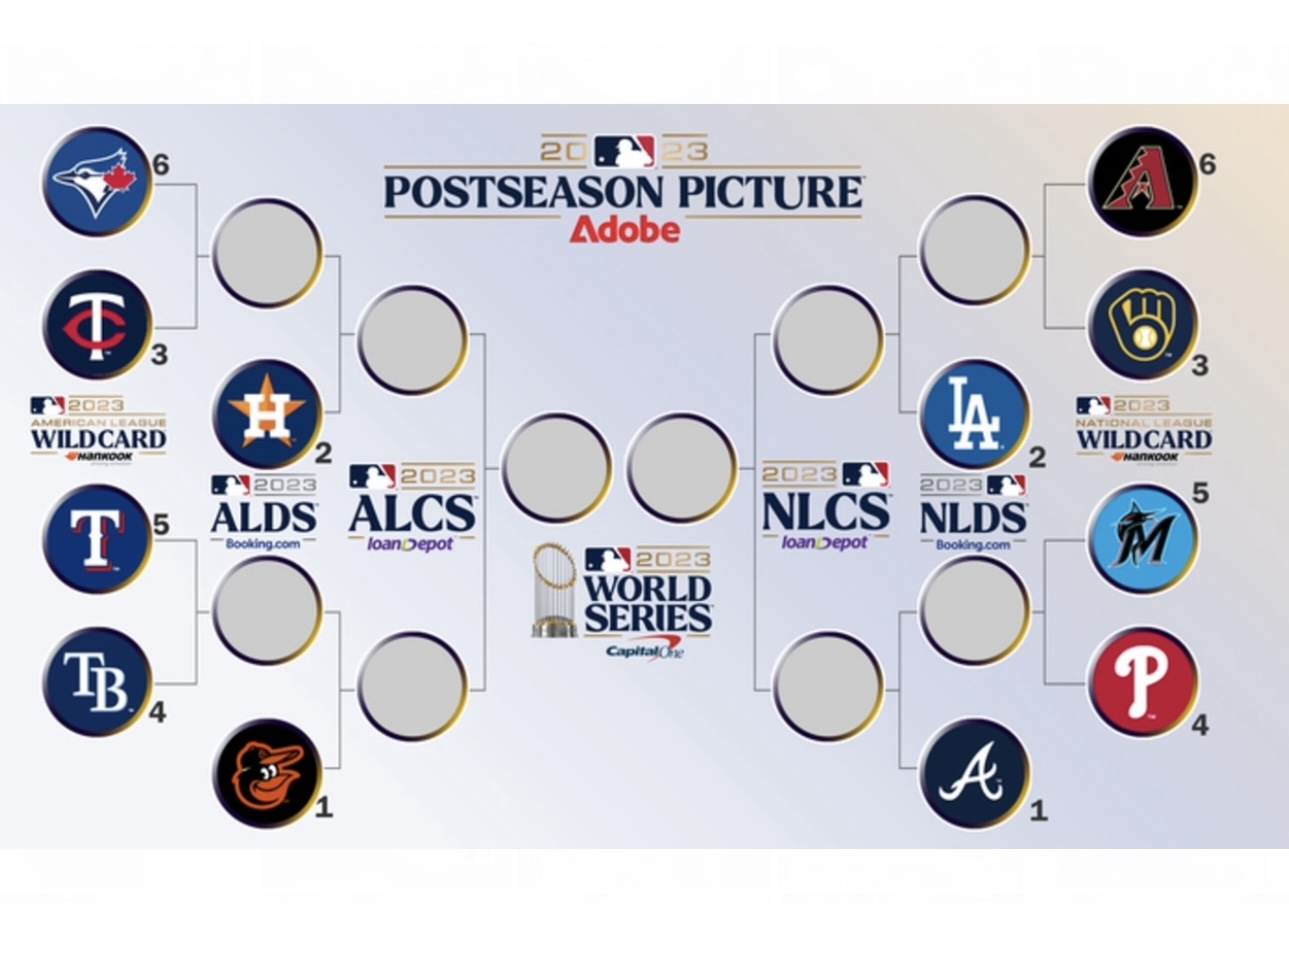 MLB playoff schedule: Dates for Astros fans to circle on calendar